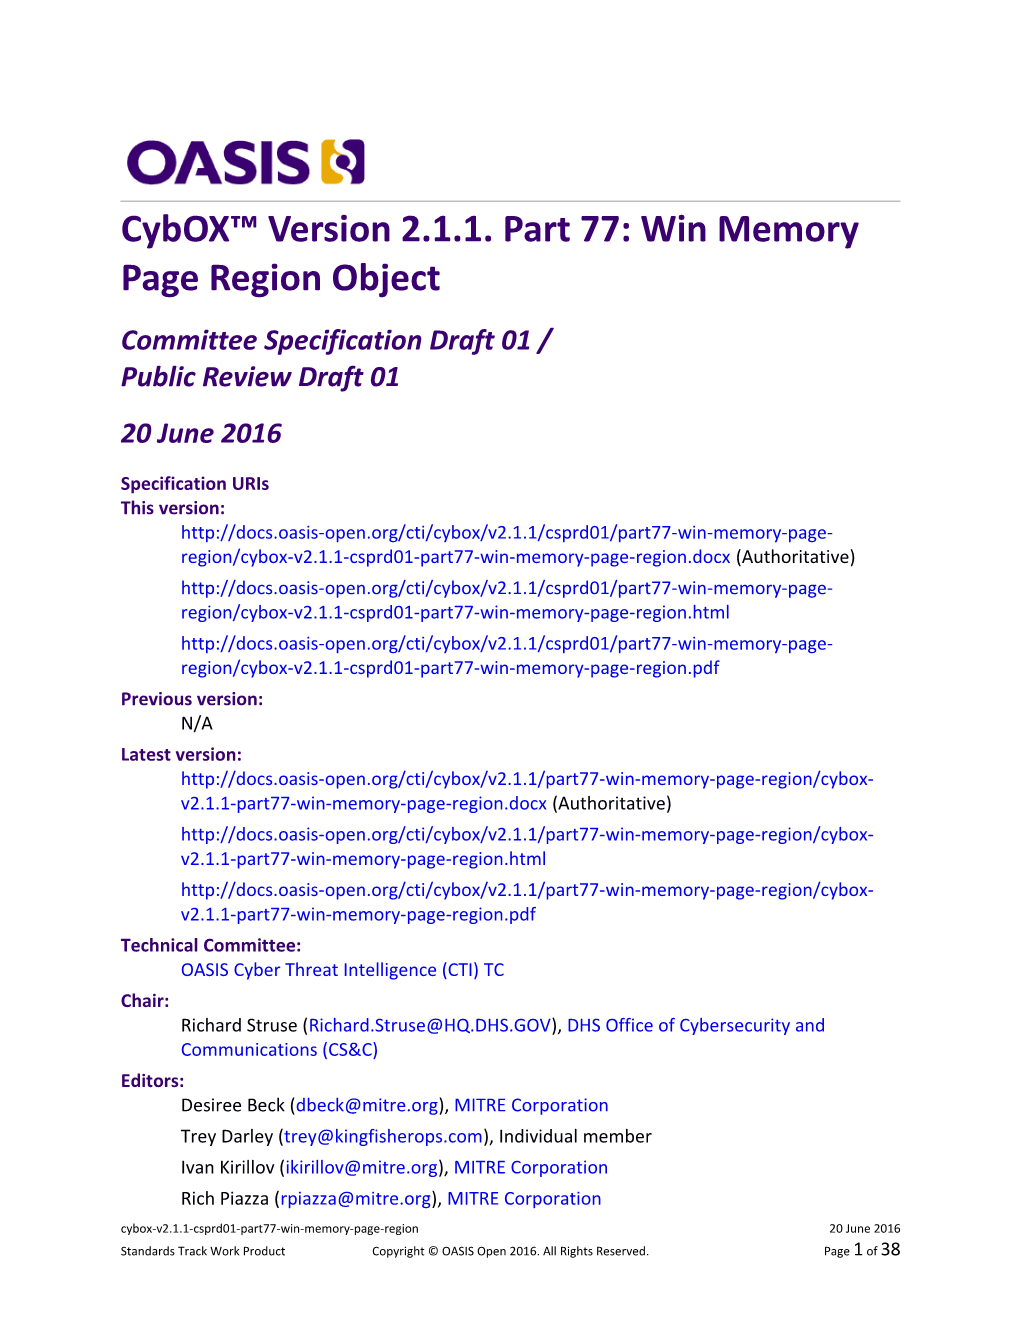 Cybox Version 2.1.1. Part 77: Win Memory Page Region Object